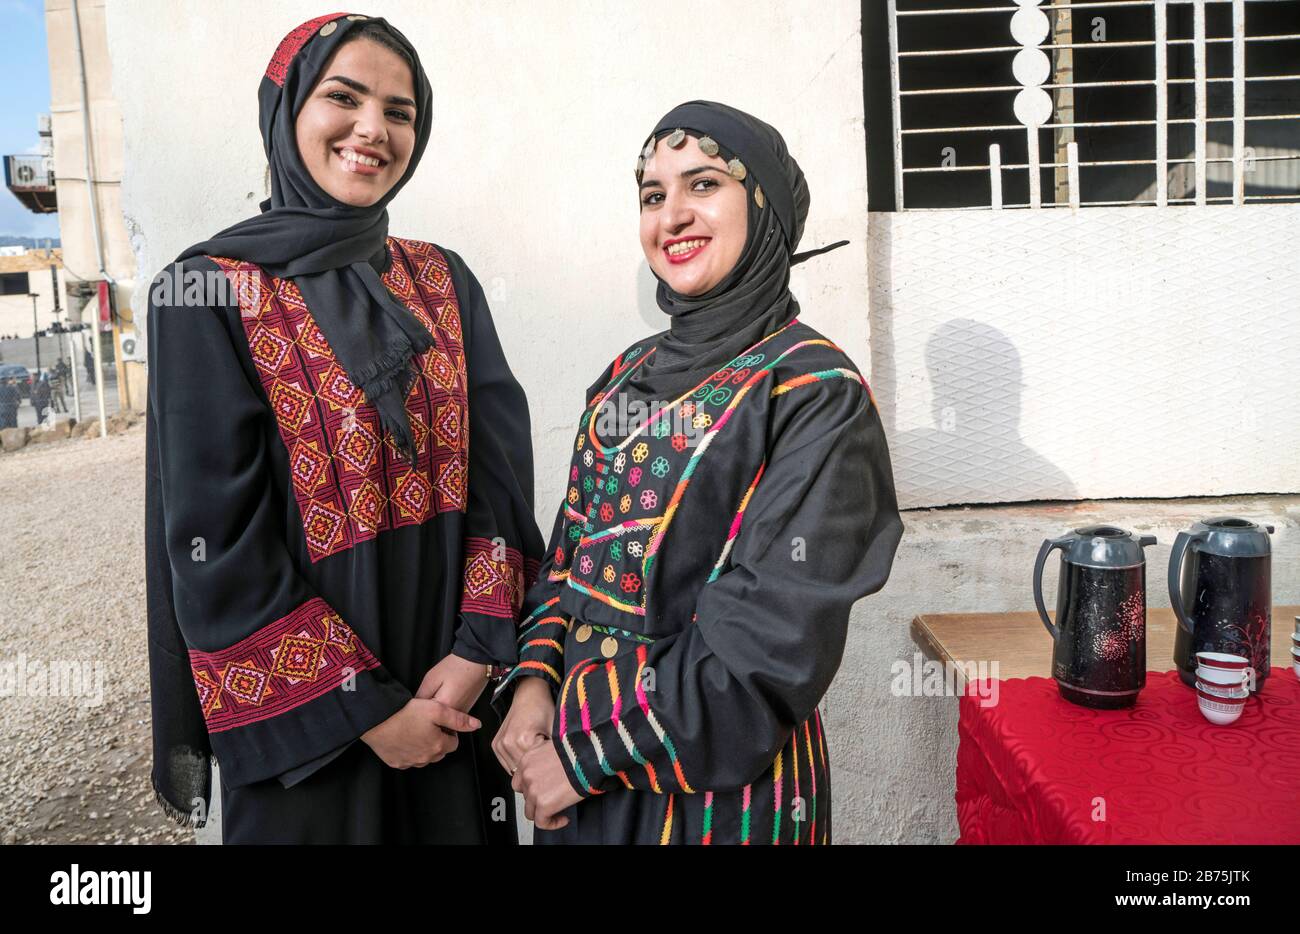 Jordan, Gerasa, 28.01.2018. Women with traditional clothing in Gerasa, Jordan on 28.01.2018. First traces of human settlement in Gerasa date back to the 6th millennium BC. In 106 AD, Gerasa became part of the new Roman province of Arabia Petraea. [automated translation] Stock Photo